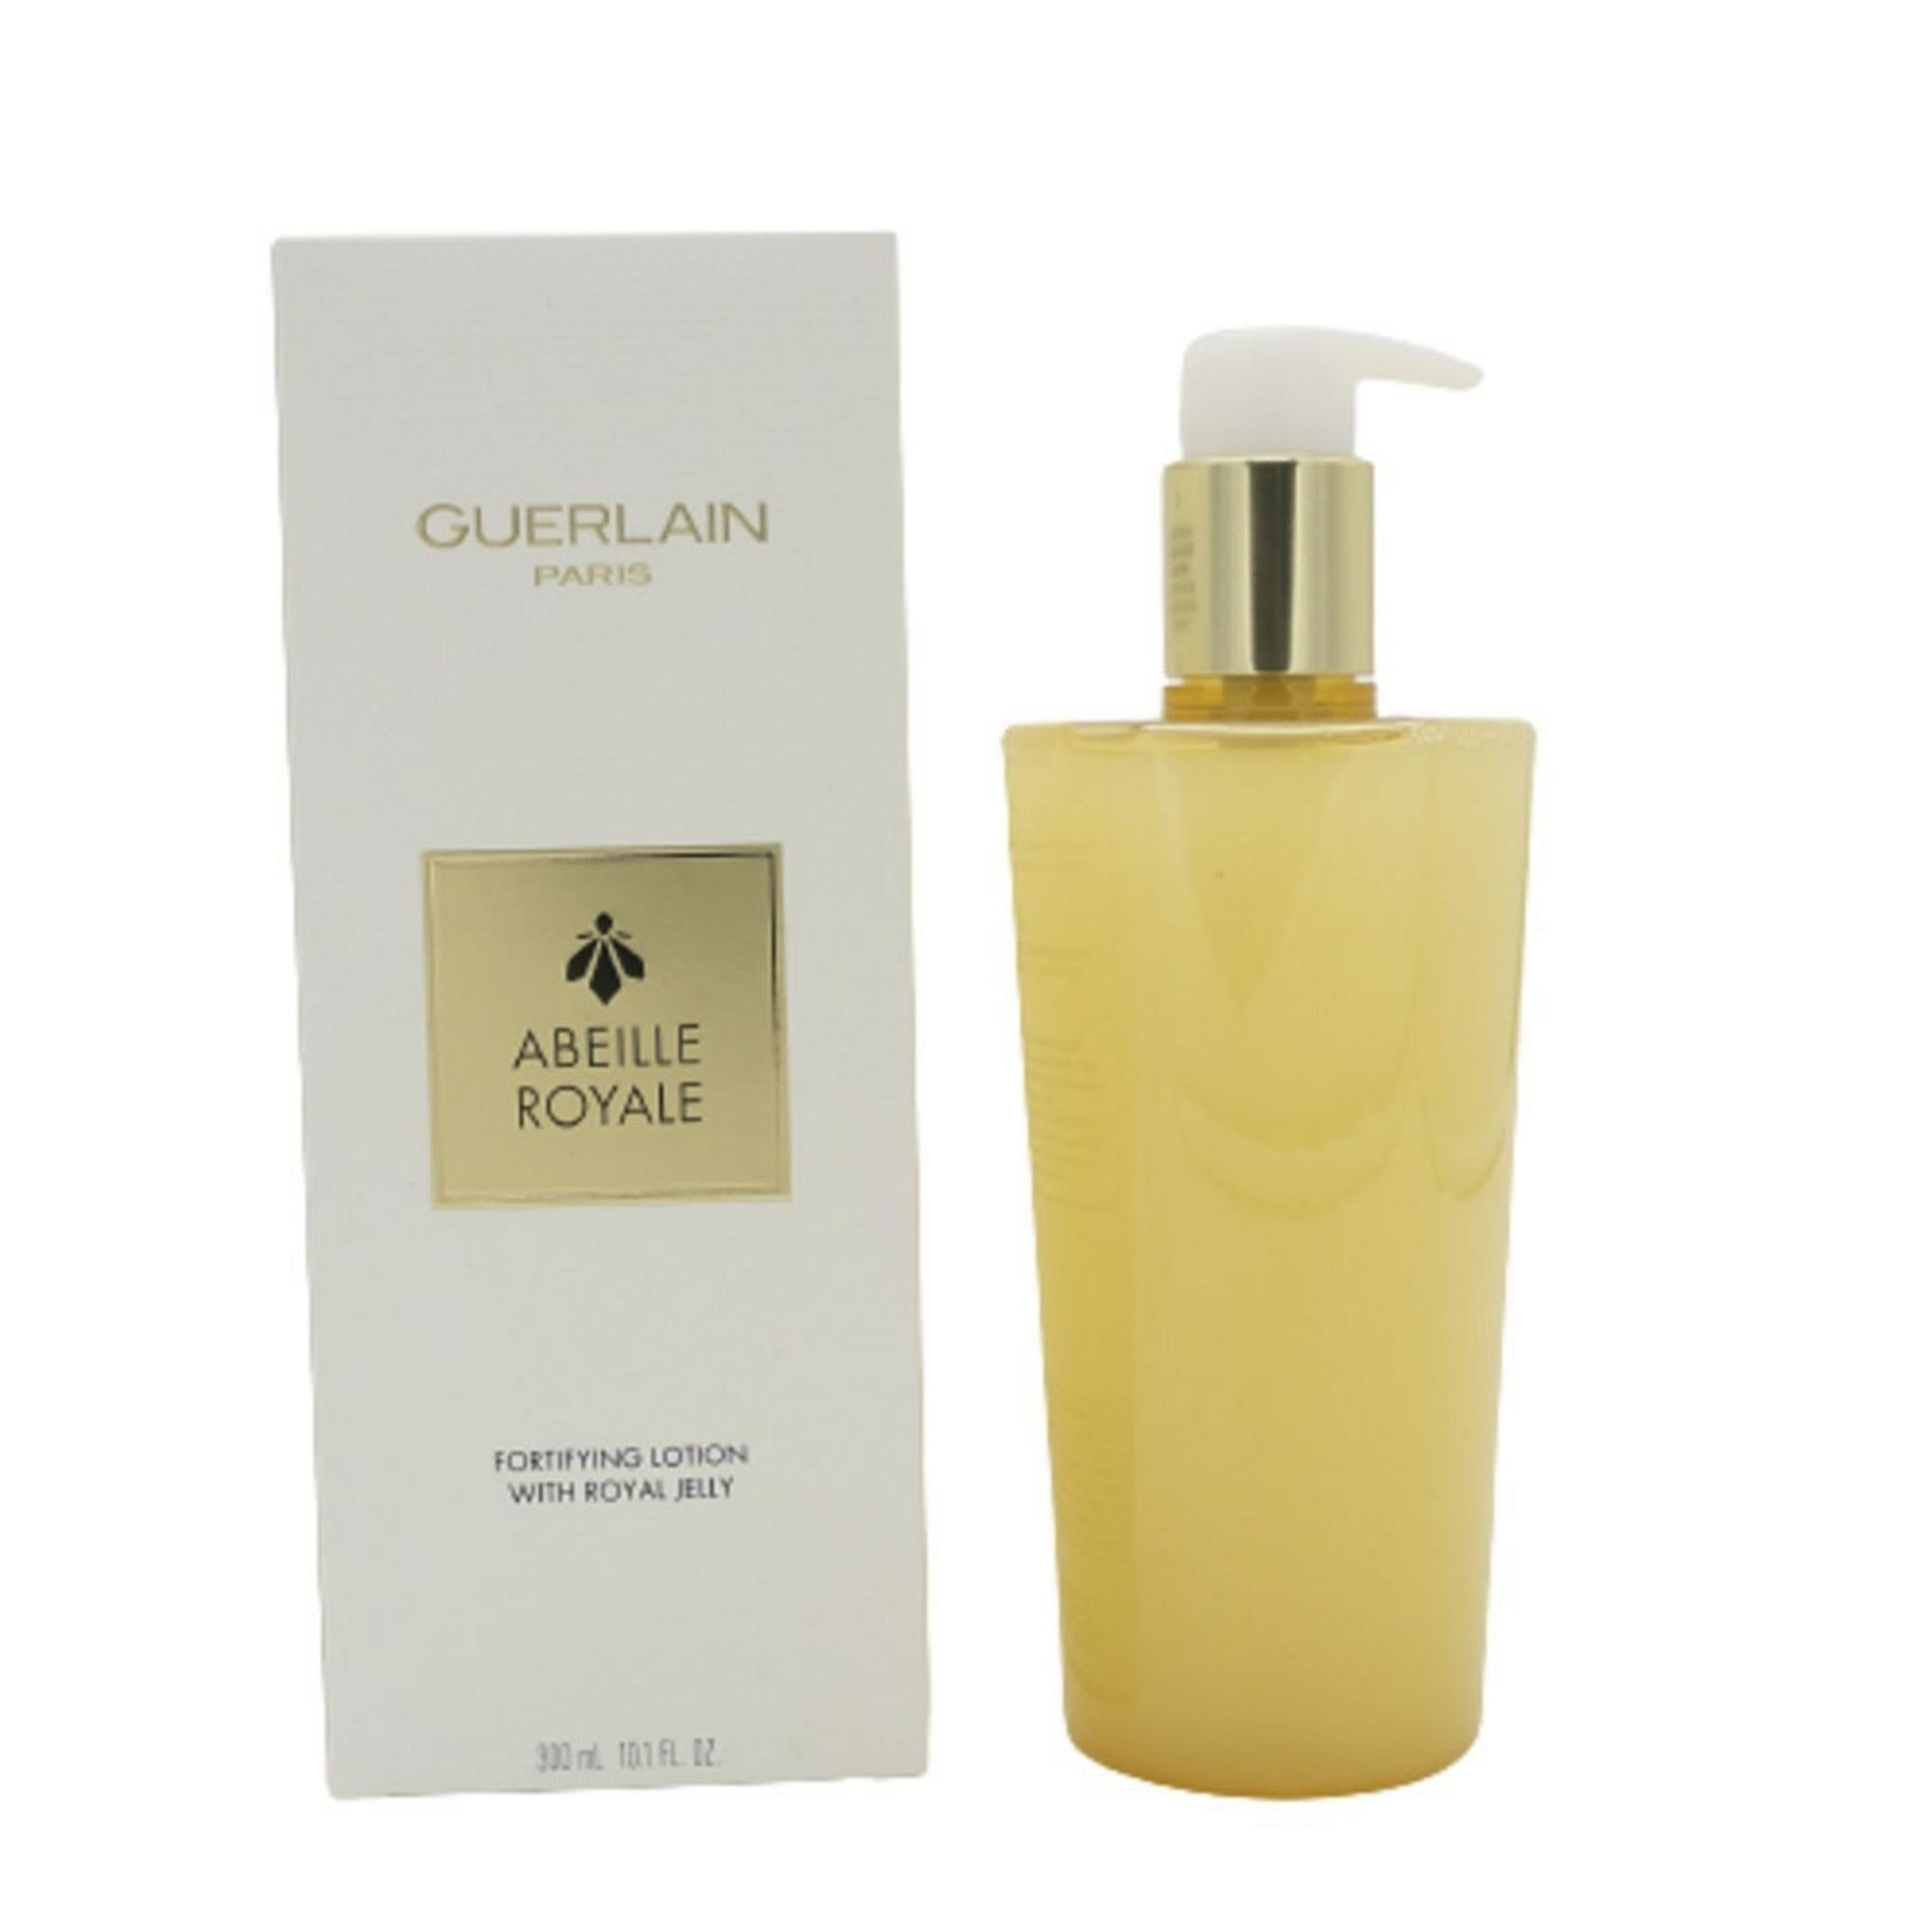 Guerlain Aveille Royal Fortifying Lotion